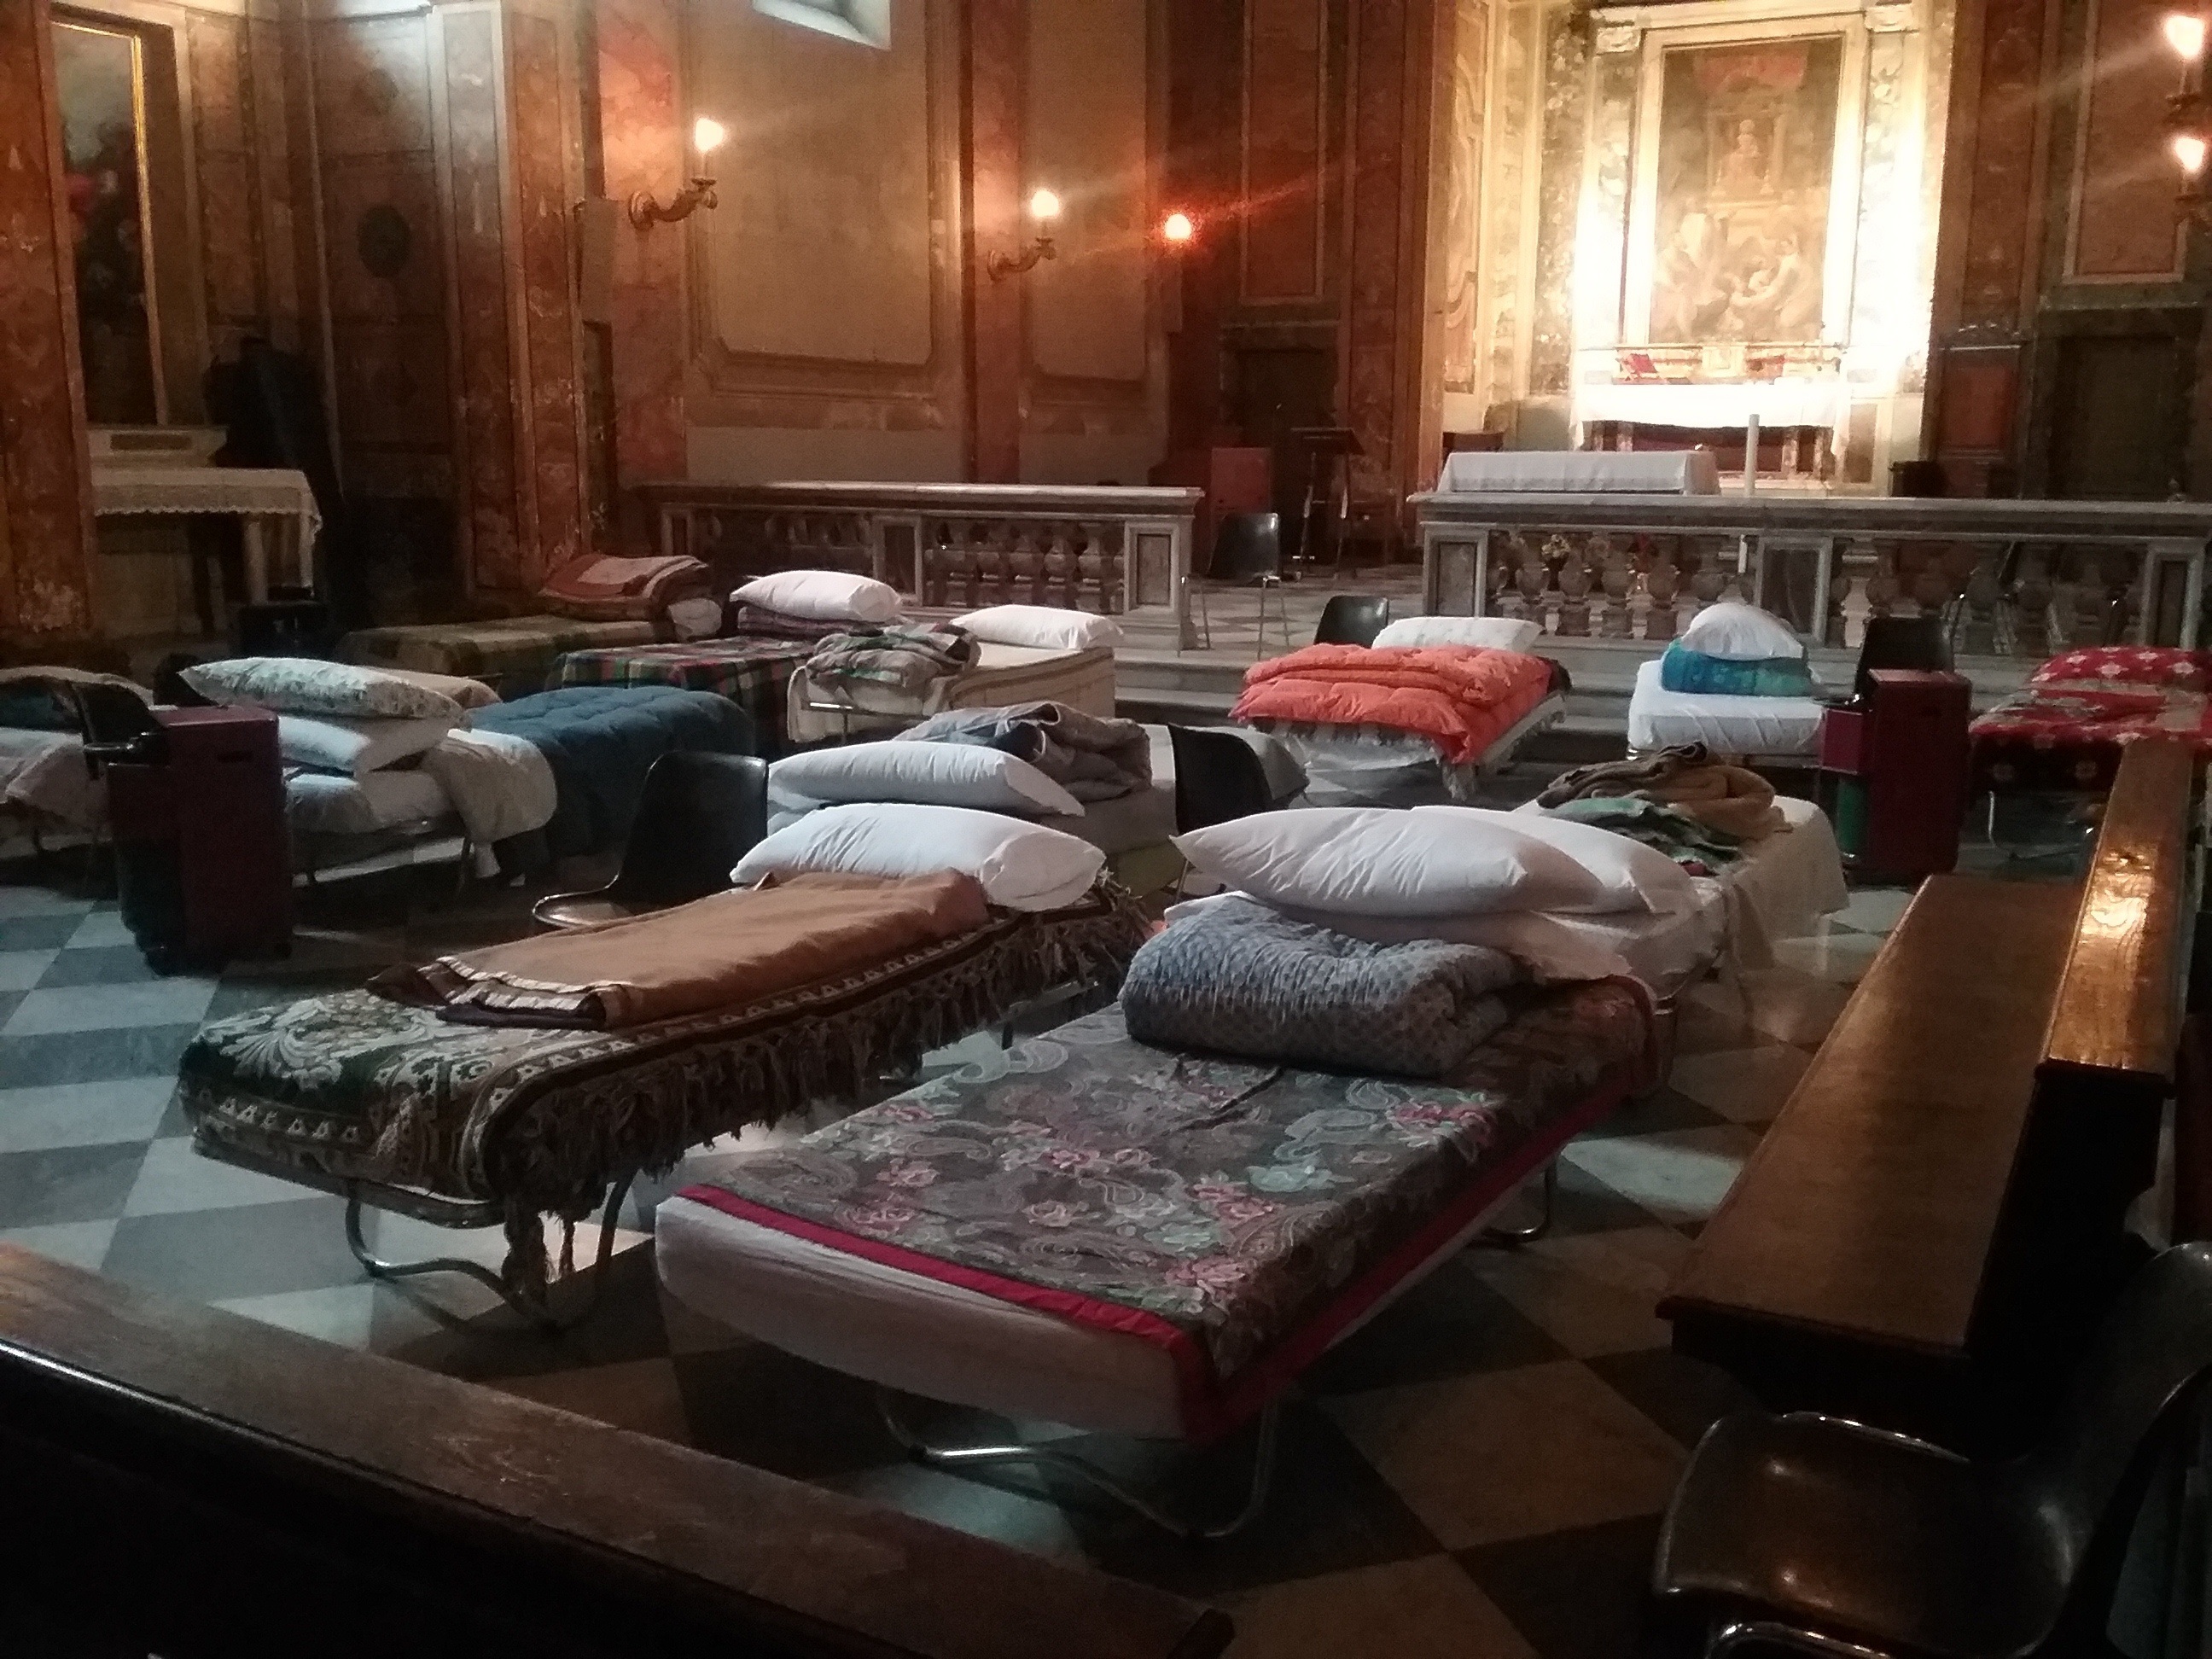 In this undated photo beds are lined up inside the St. Calixtus church in Rome, The Vatican is letting homeless people sleep in a Rome church during a spell of unusually cold weather for the Italian capital. In Rome lately, nighttime temperatures have dropped below freezing. The Vatican say that around 30 people, Italians and foreigners, have accepted the invitation to sleep inside St. Calixtus church, whose foundations were laid near a well where Pope Calixtus I was martyred in 222. (L'Osservatore Romano/Pool Photo via AP)